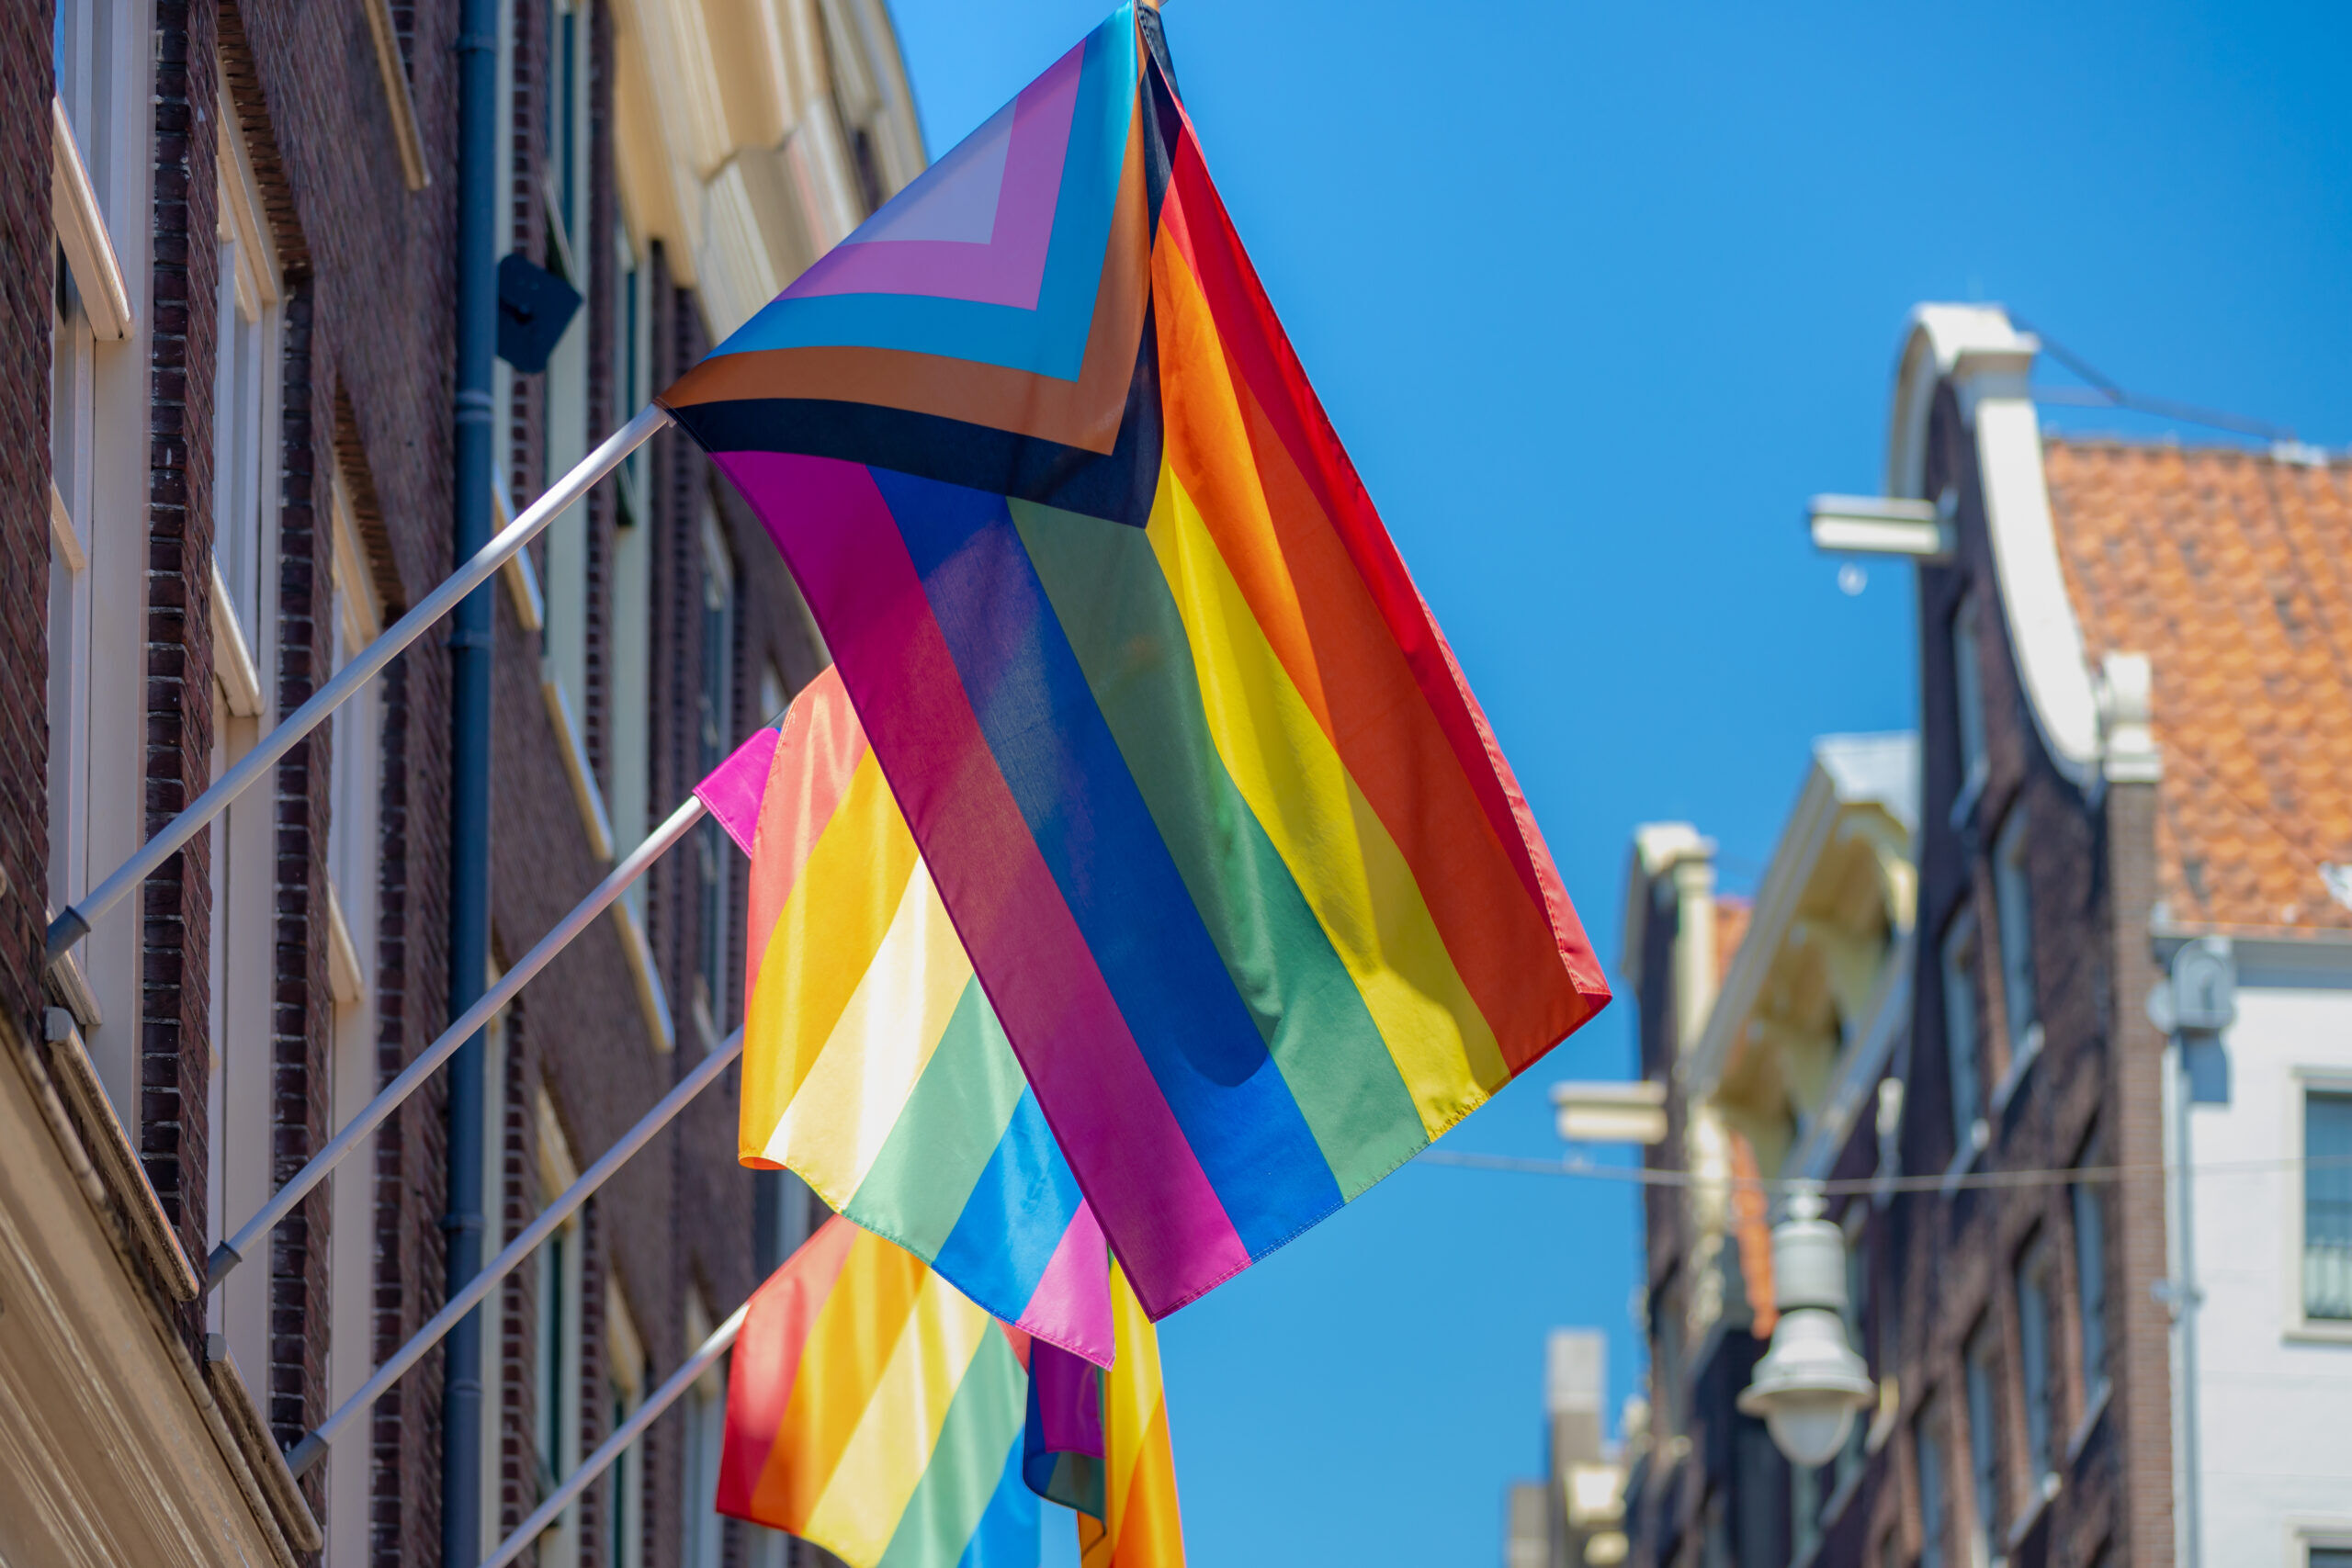 Progress pride flag (new design of rainbow flag) waving in the air with blue sky, LGBTQ community in Netherlands